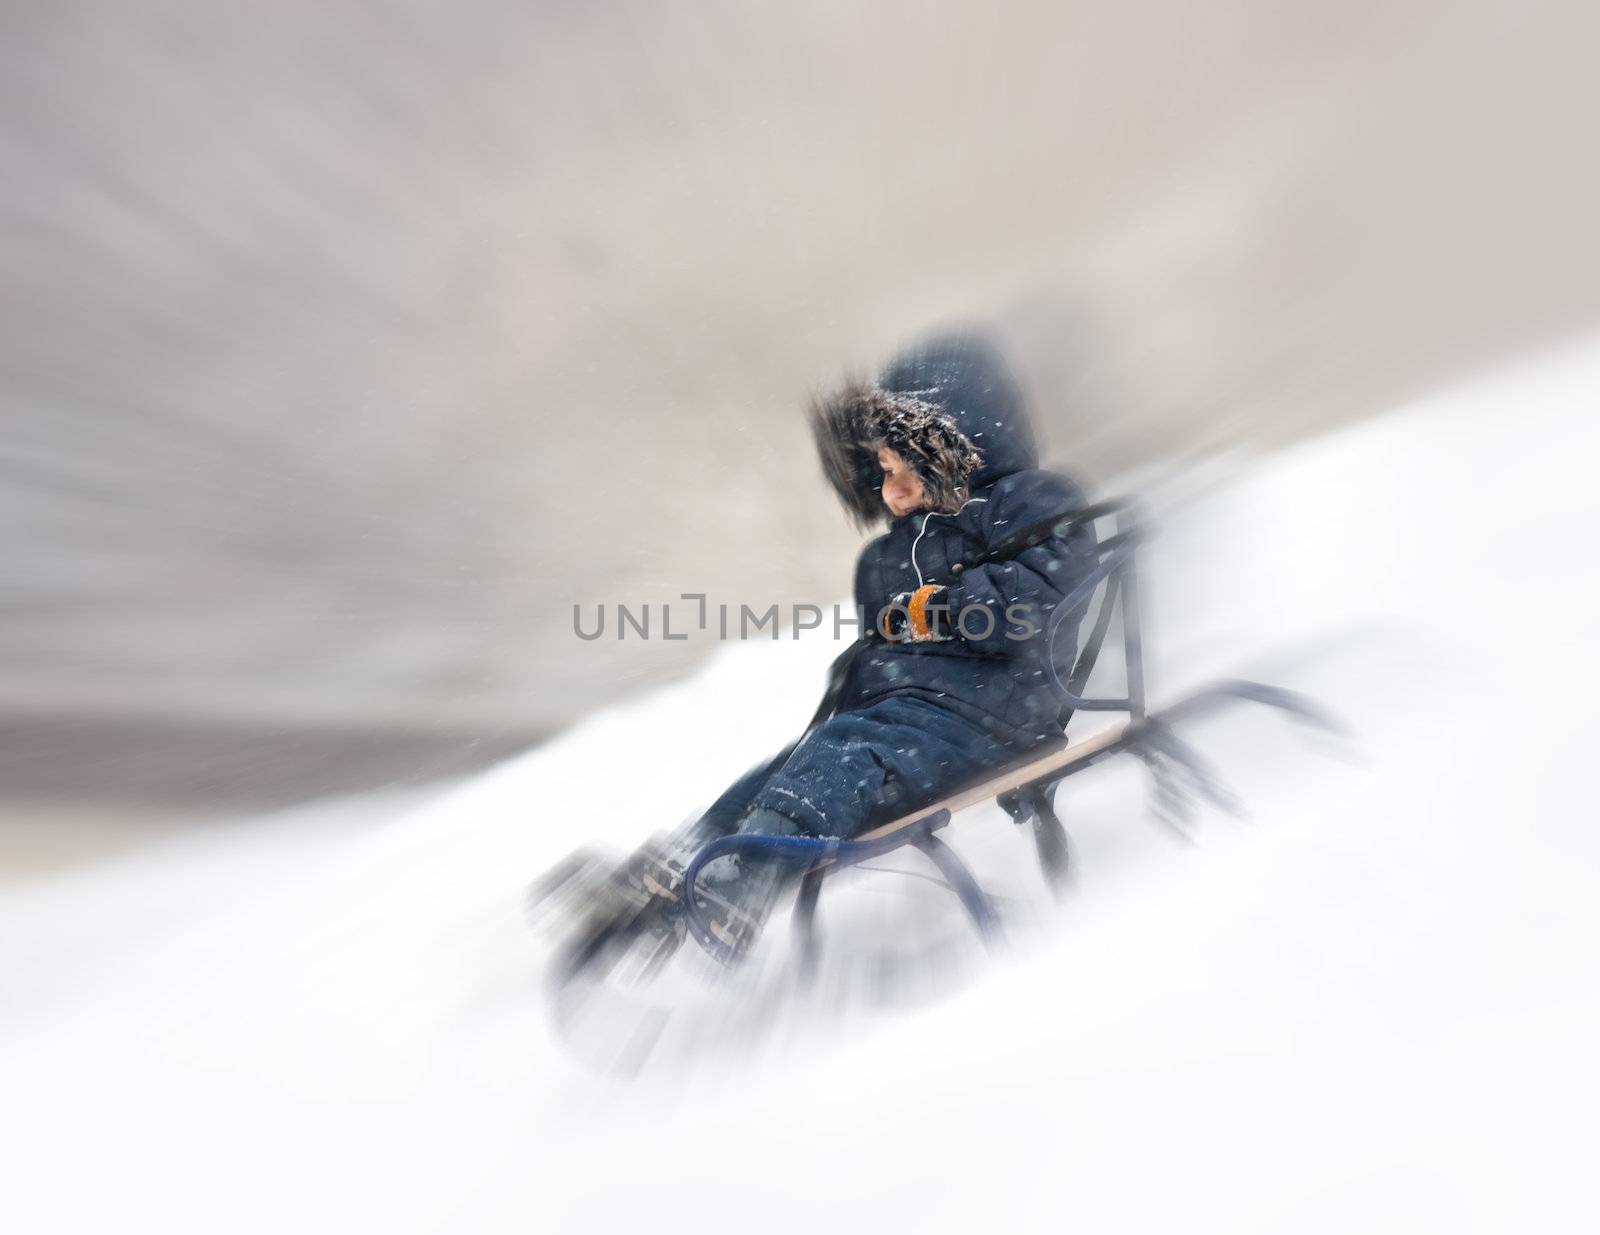 Young boy on sledge sliding fast down snowy hill with motion blur